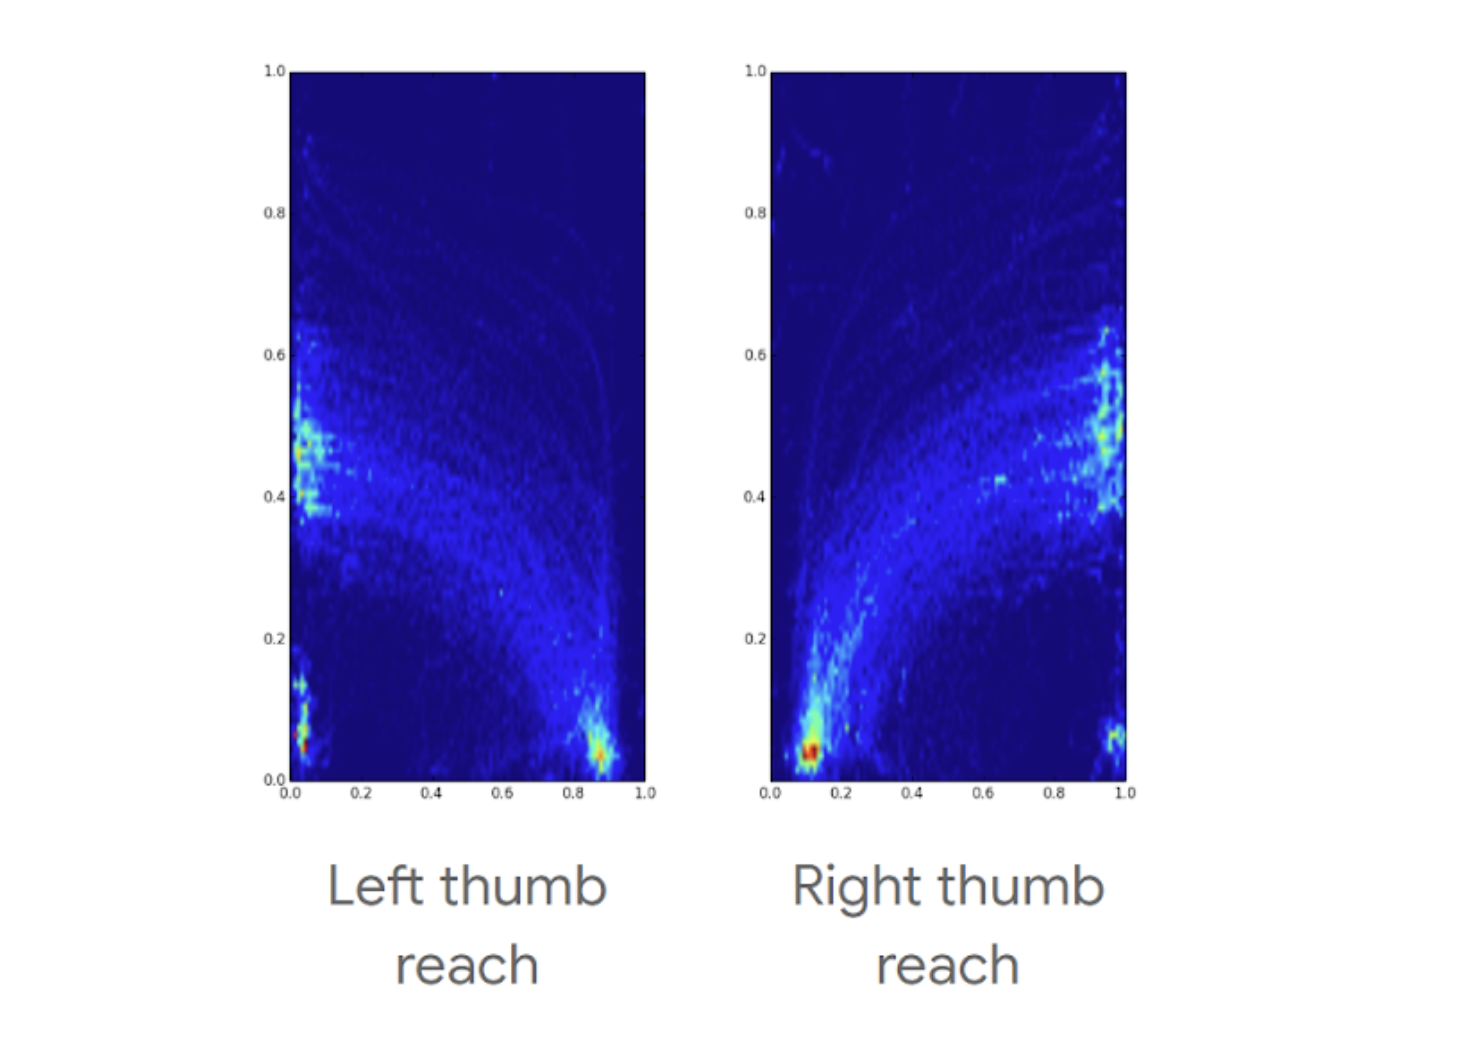 Phone screen heatmaps showing where users can comfortably do gestures, holding the phone in only one hand
